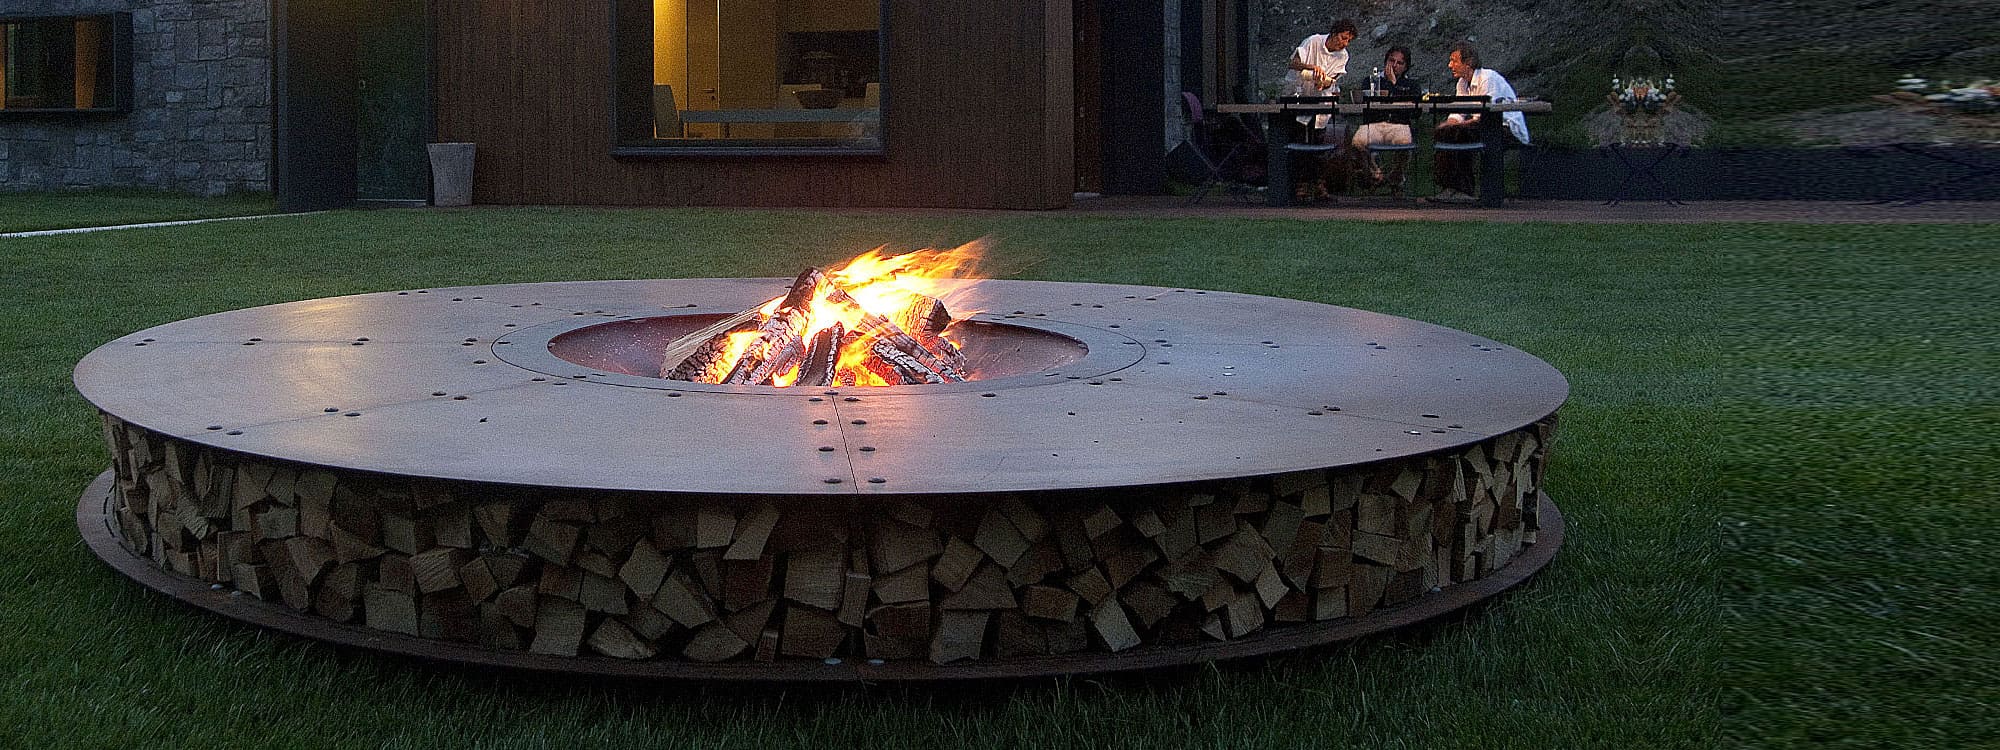 Image of garden at dusk with flames dancing within AK47 Zero large circular fire pit's burning chamber